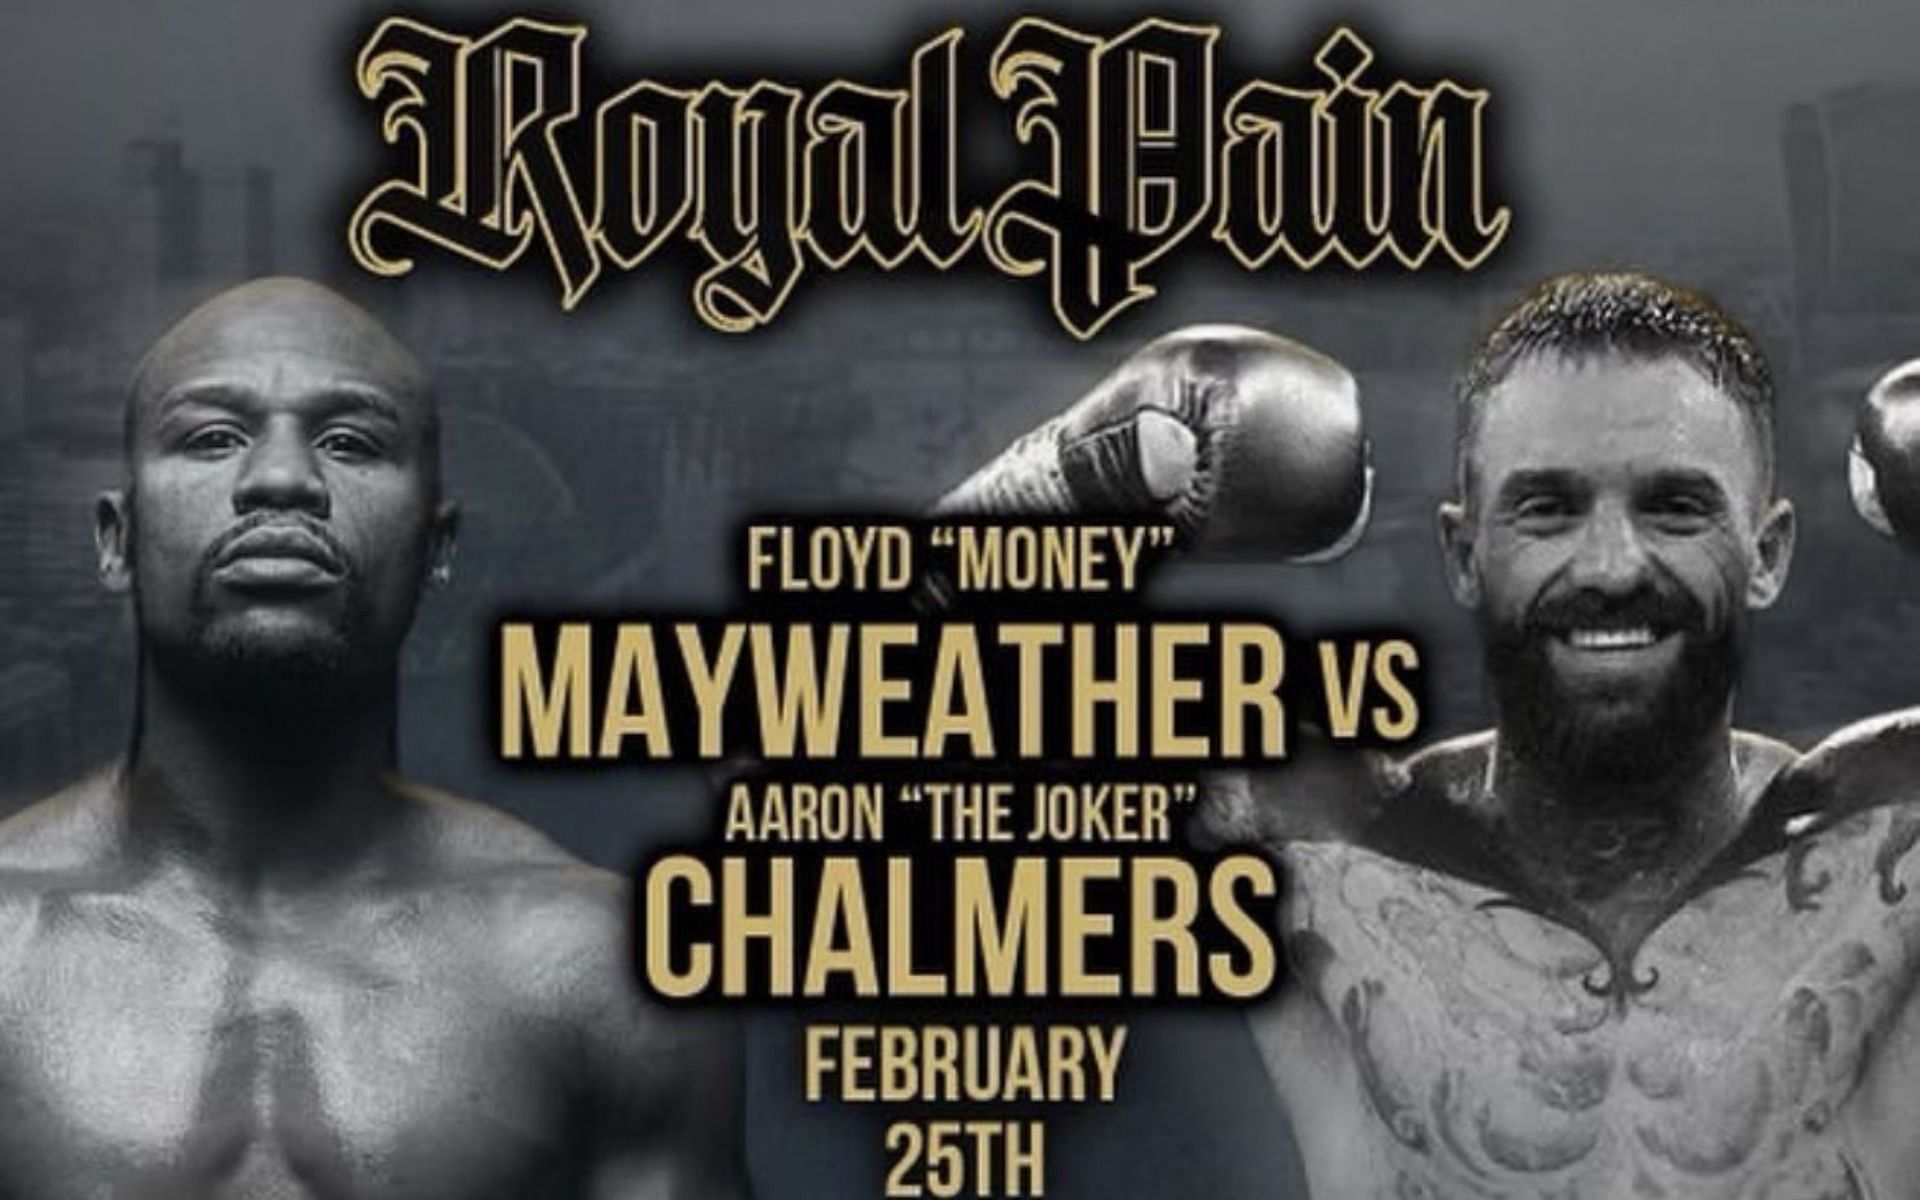 Floyd Mayweather Breaking Floyd Mayweather set to face retired English MMA fighter Aaron Chalmers in exhibition bout in February